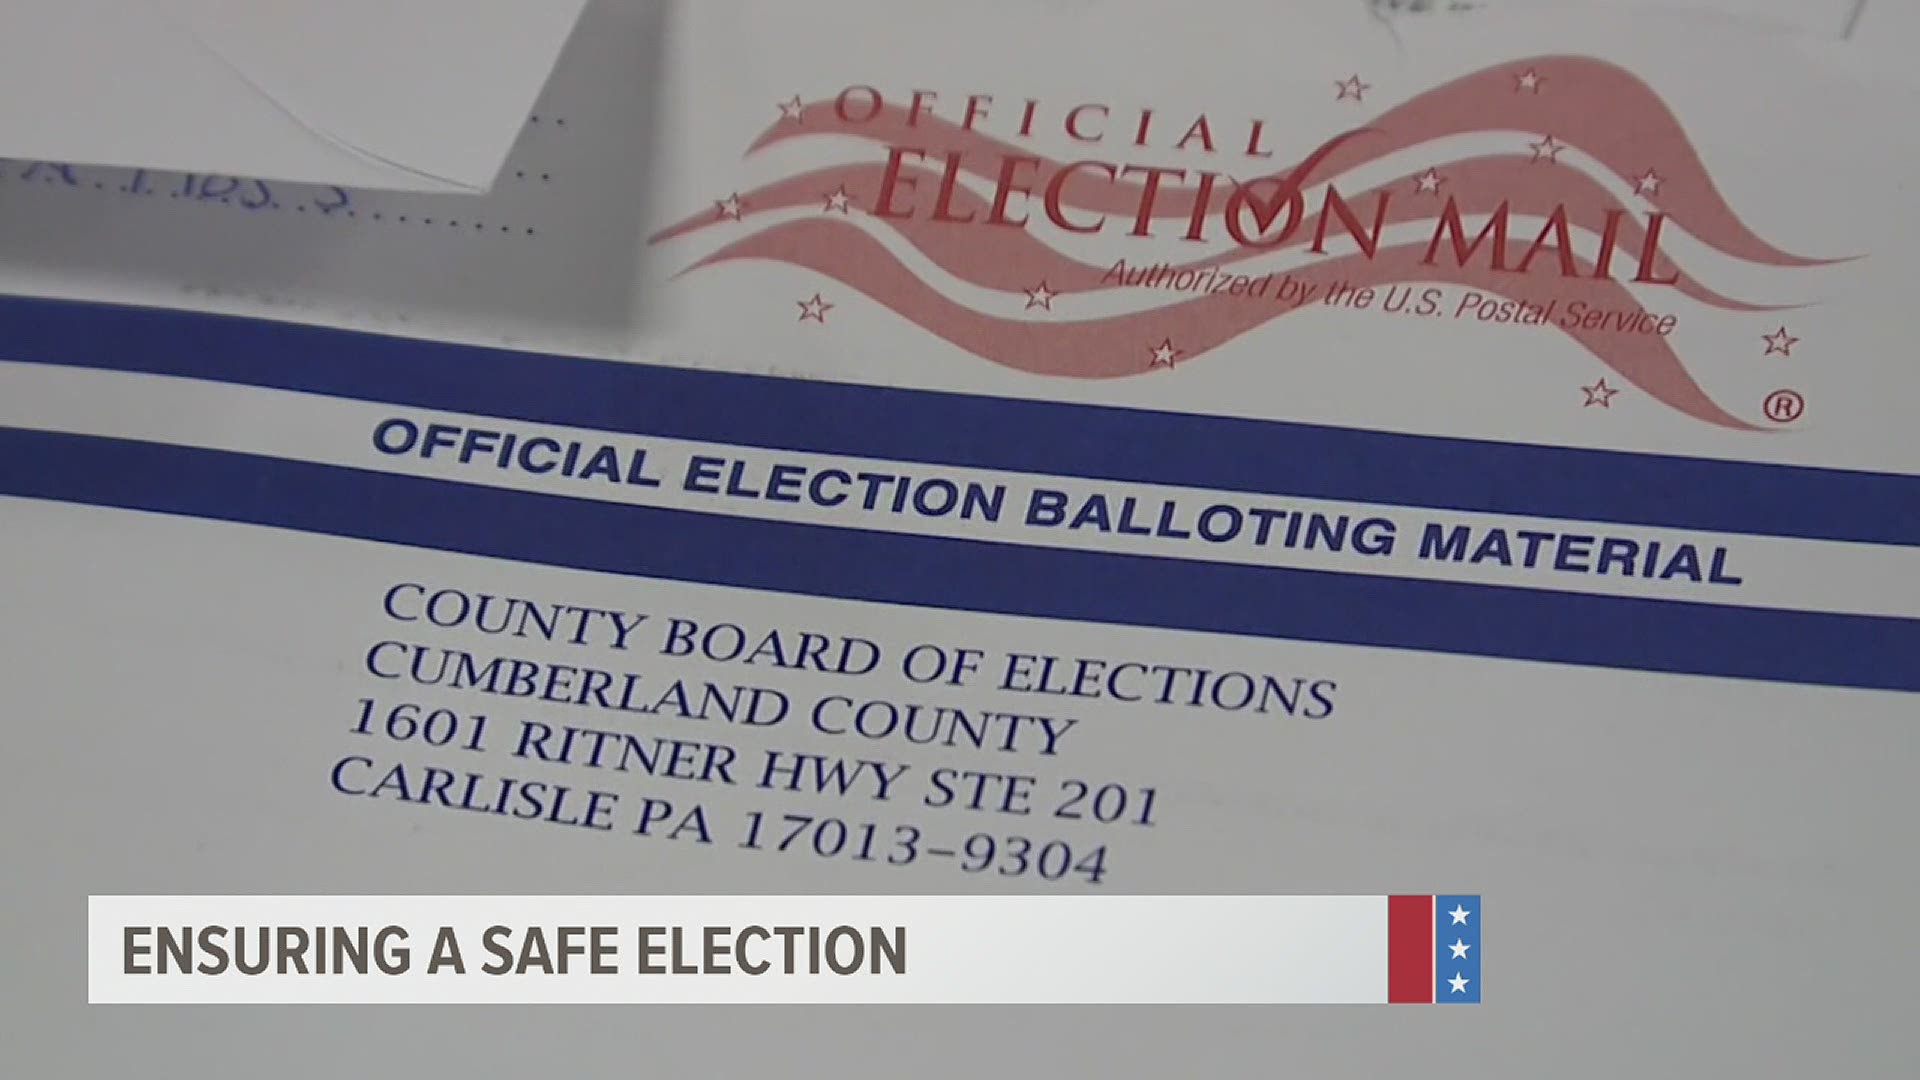 PA Dept of State ensuring a safe election by educating public on mail-in and absentee ballots